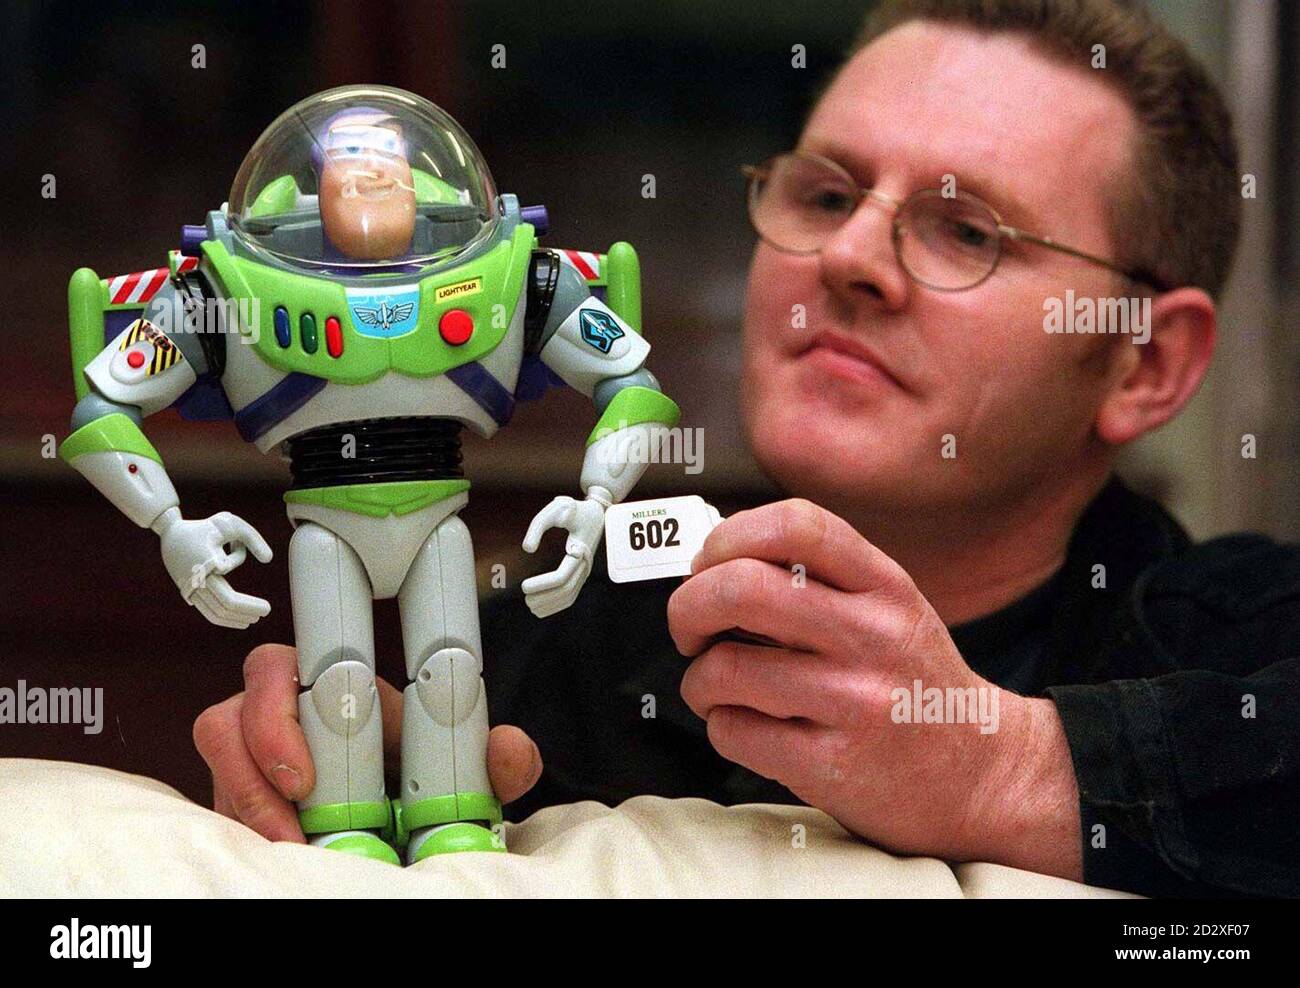 Harry Meers from Newcastle ,who today (mon) bought Buzz Lightyear, a character from the top feature film Toy Story. Mr Meer paid three times the normal selling price, paying  70 for the toy which is enjoying huge demand in the run-up to Christmas. Photo by Owen Humphreys/PA. Stock Photo